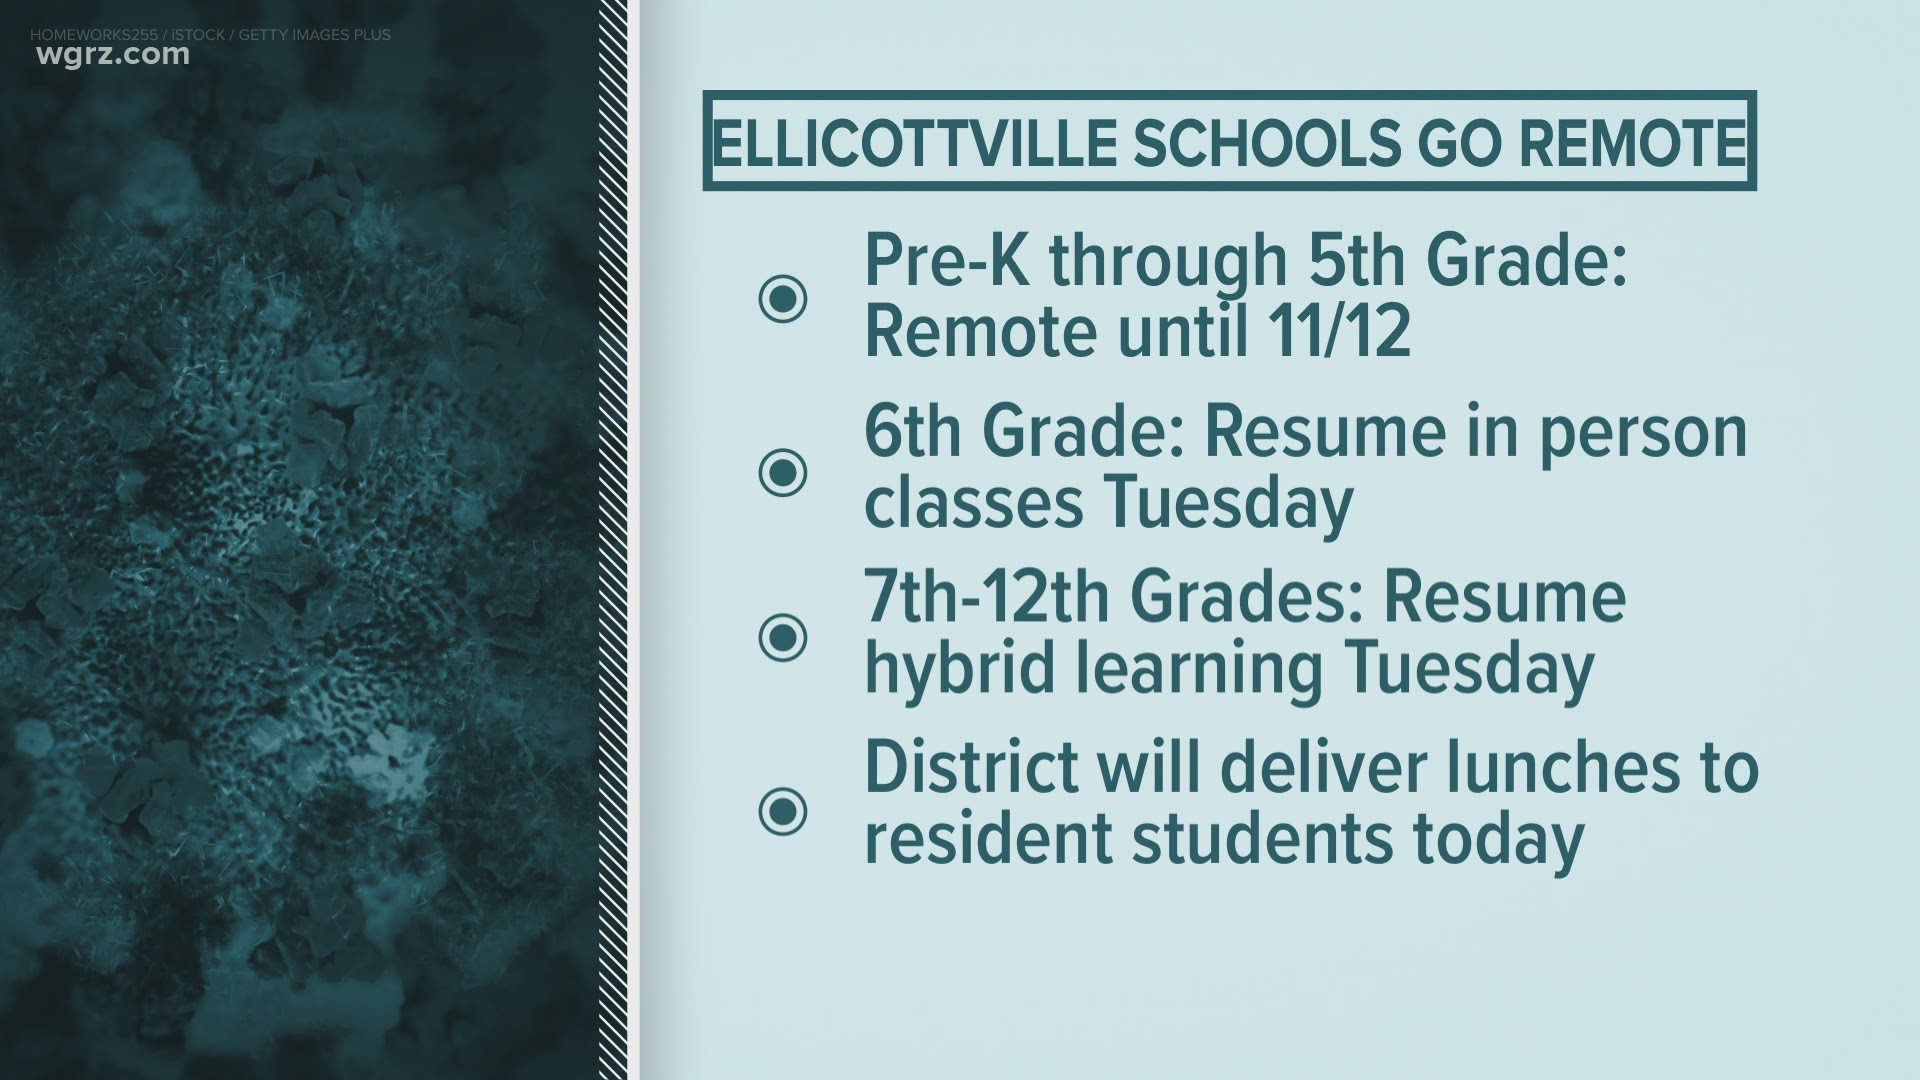 The school said pre-K- 5th grade will be remote until next Thursday. Students in grades 6-12 will be remote Monday but return to the hybrid model shortly after.